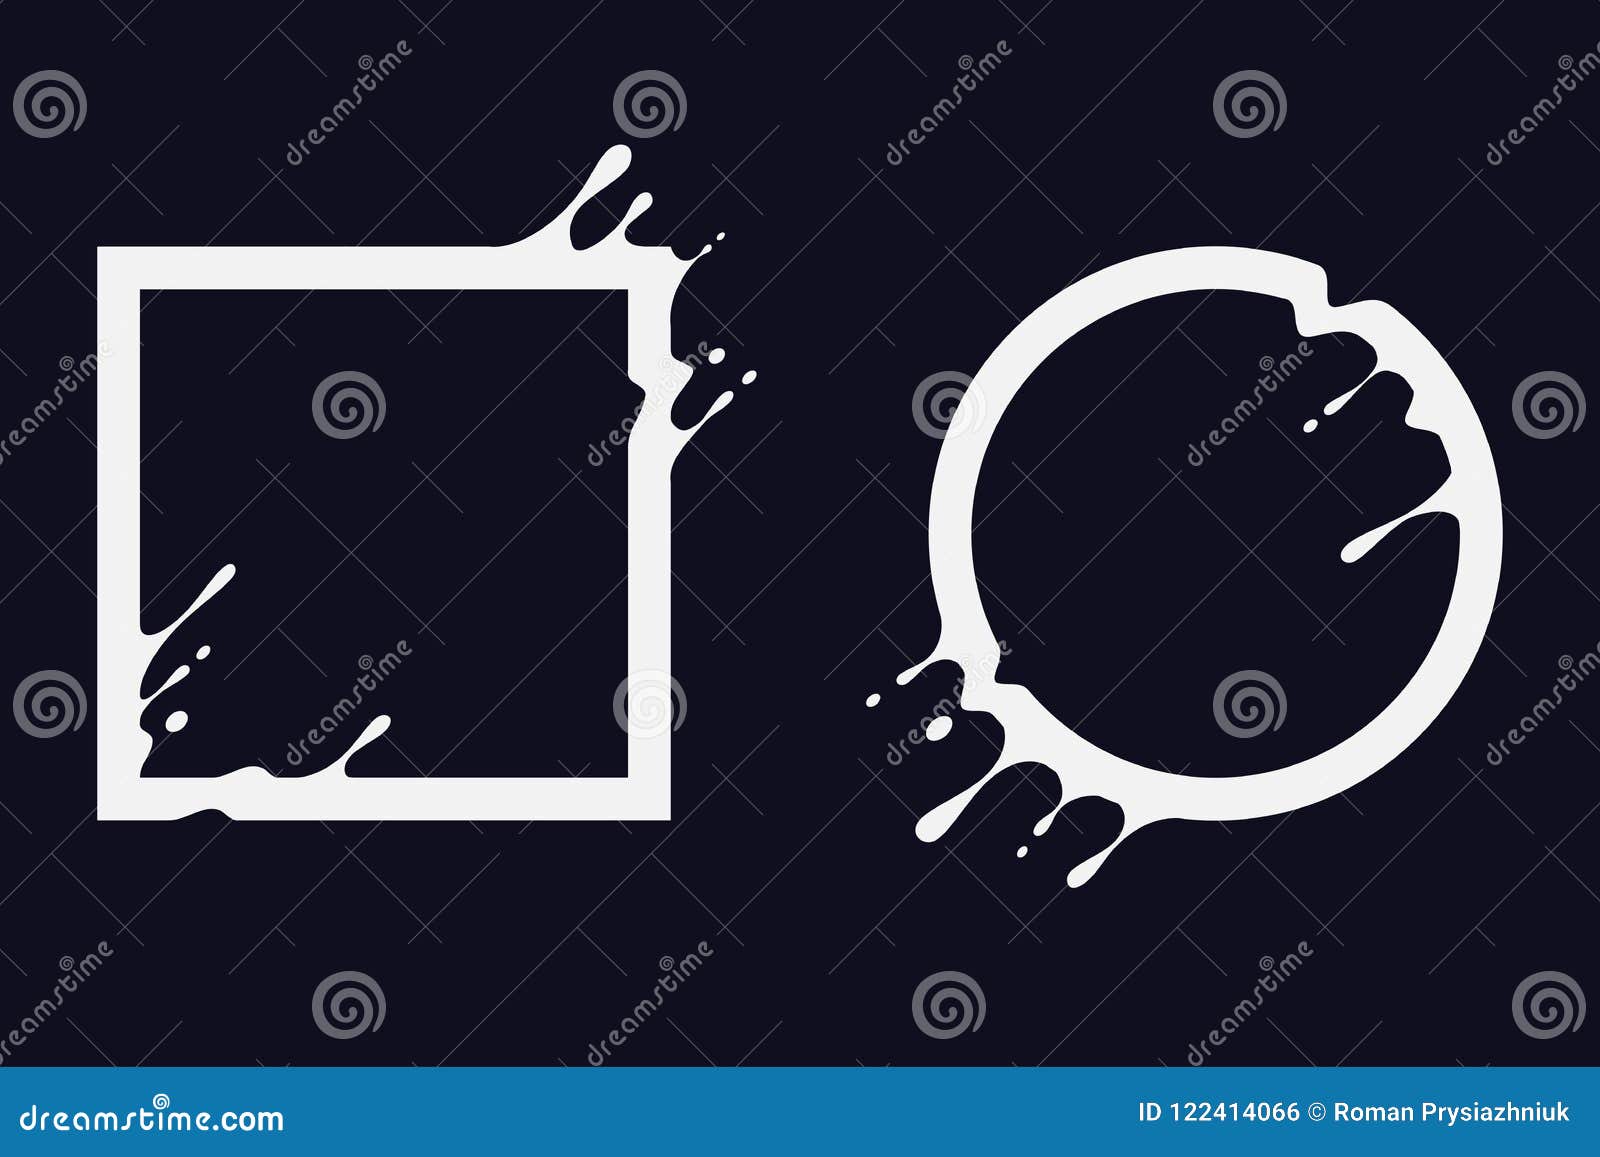 liquid circle and square. abstract s with splash and drops. flux effect  for logo, banner, poster. .